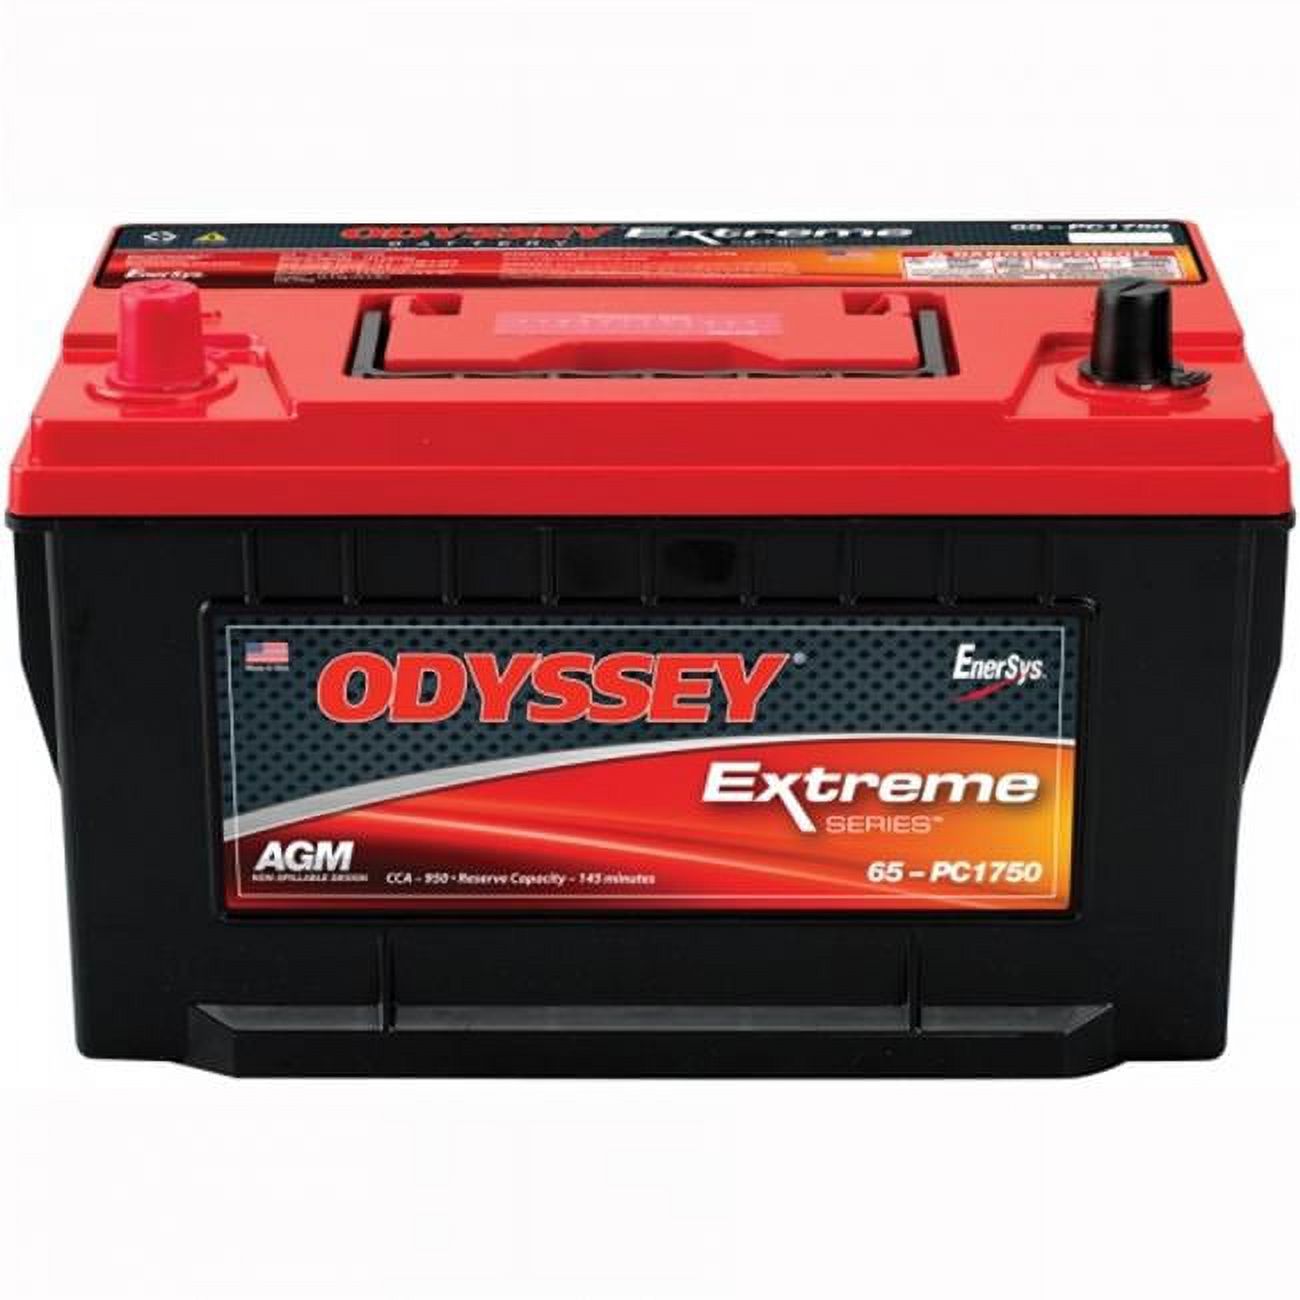 ODYSSEY Extreme Battery - ODX-AGM65 (65-PC1750) - image 1 of 2